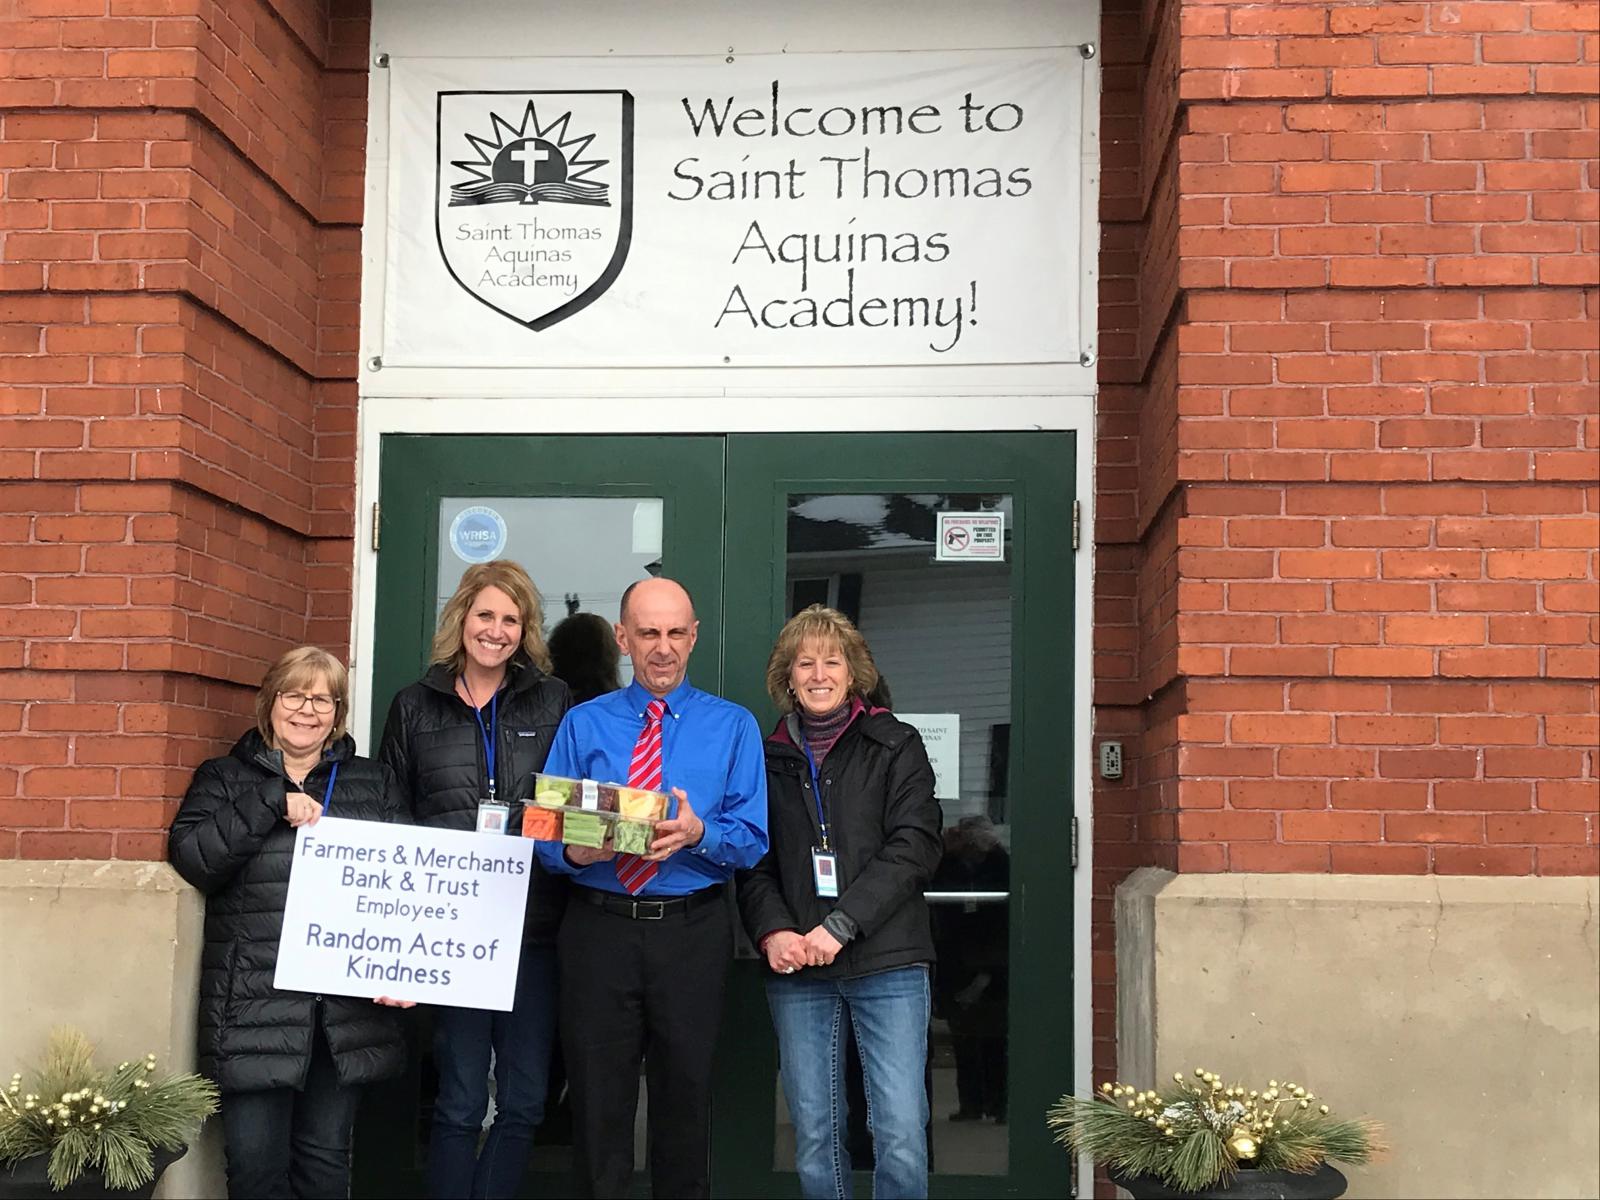 FMBT Employees delivering treats to Saint Thomas Aquinas Academy